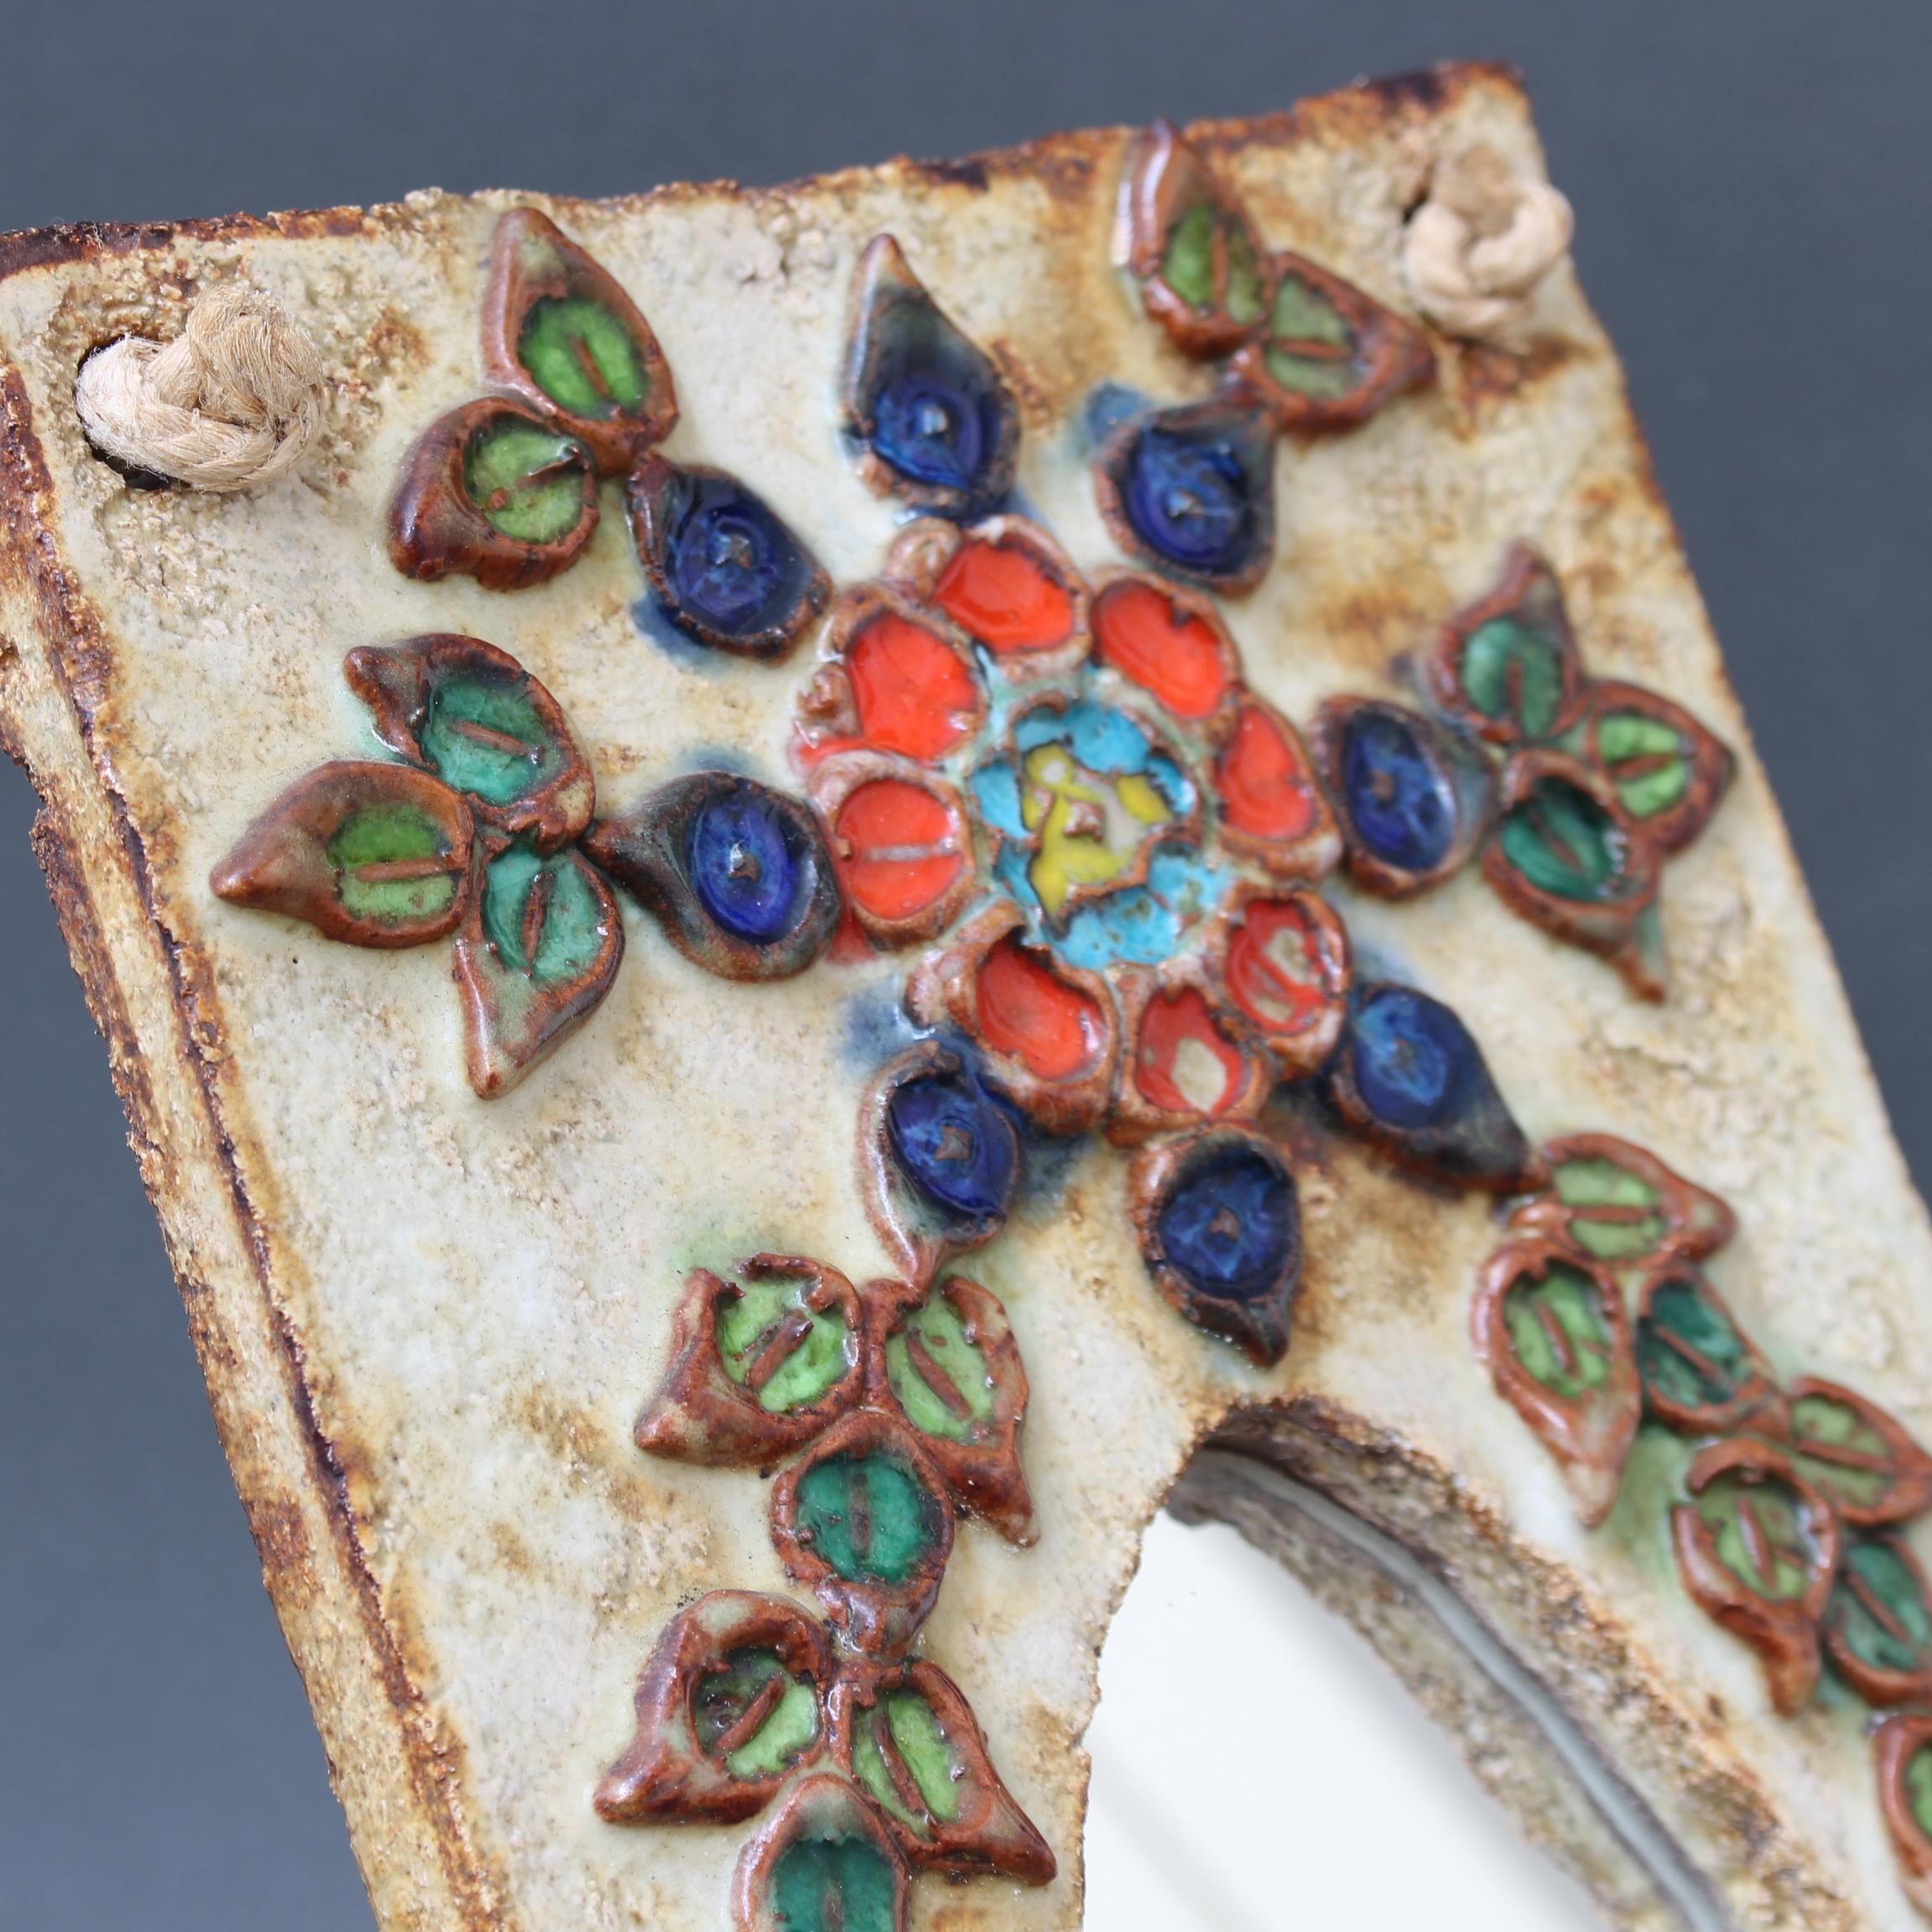 Vintage French Ceramic Wall Mirror with Flower Motif by La Roue, 'circa 1960s' For Sale 2